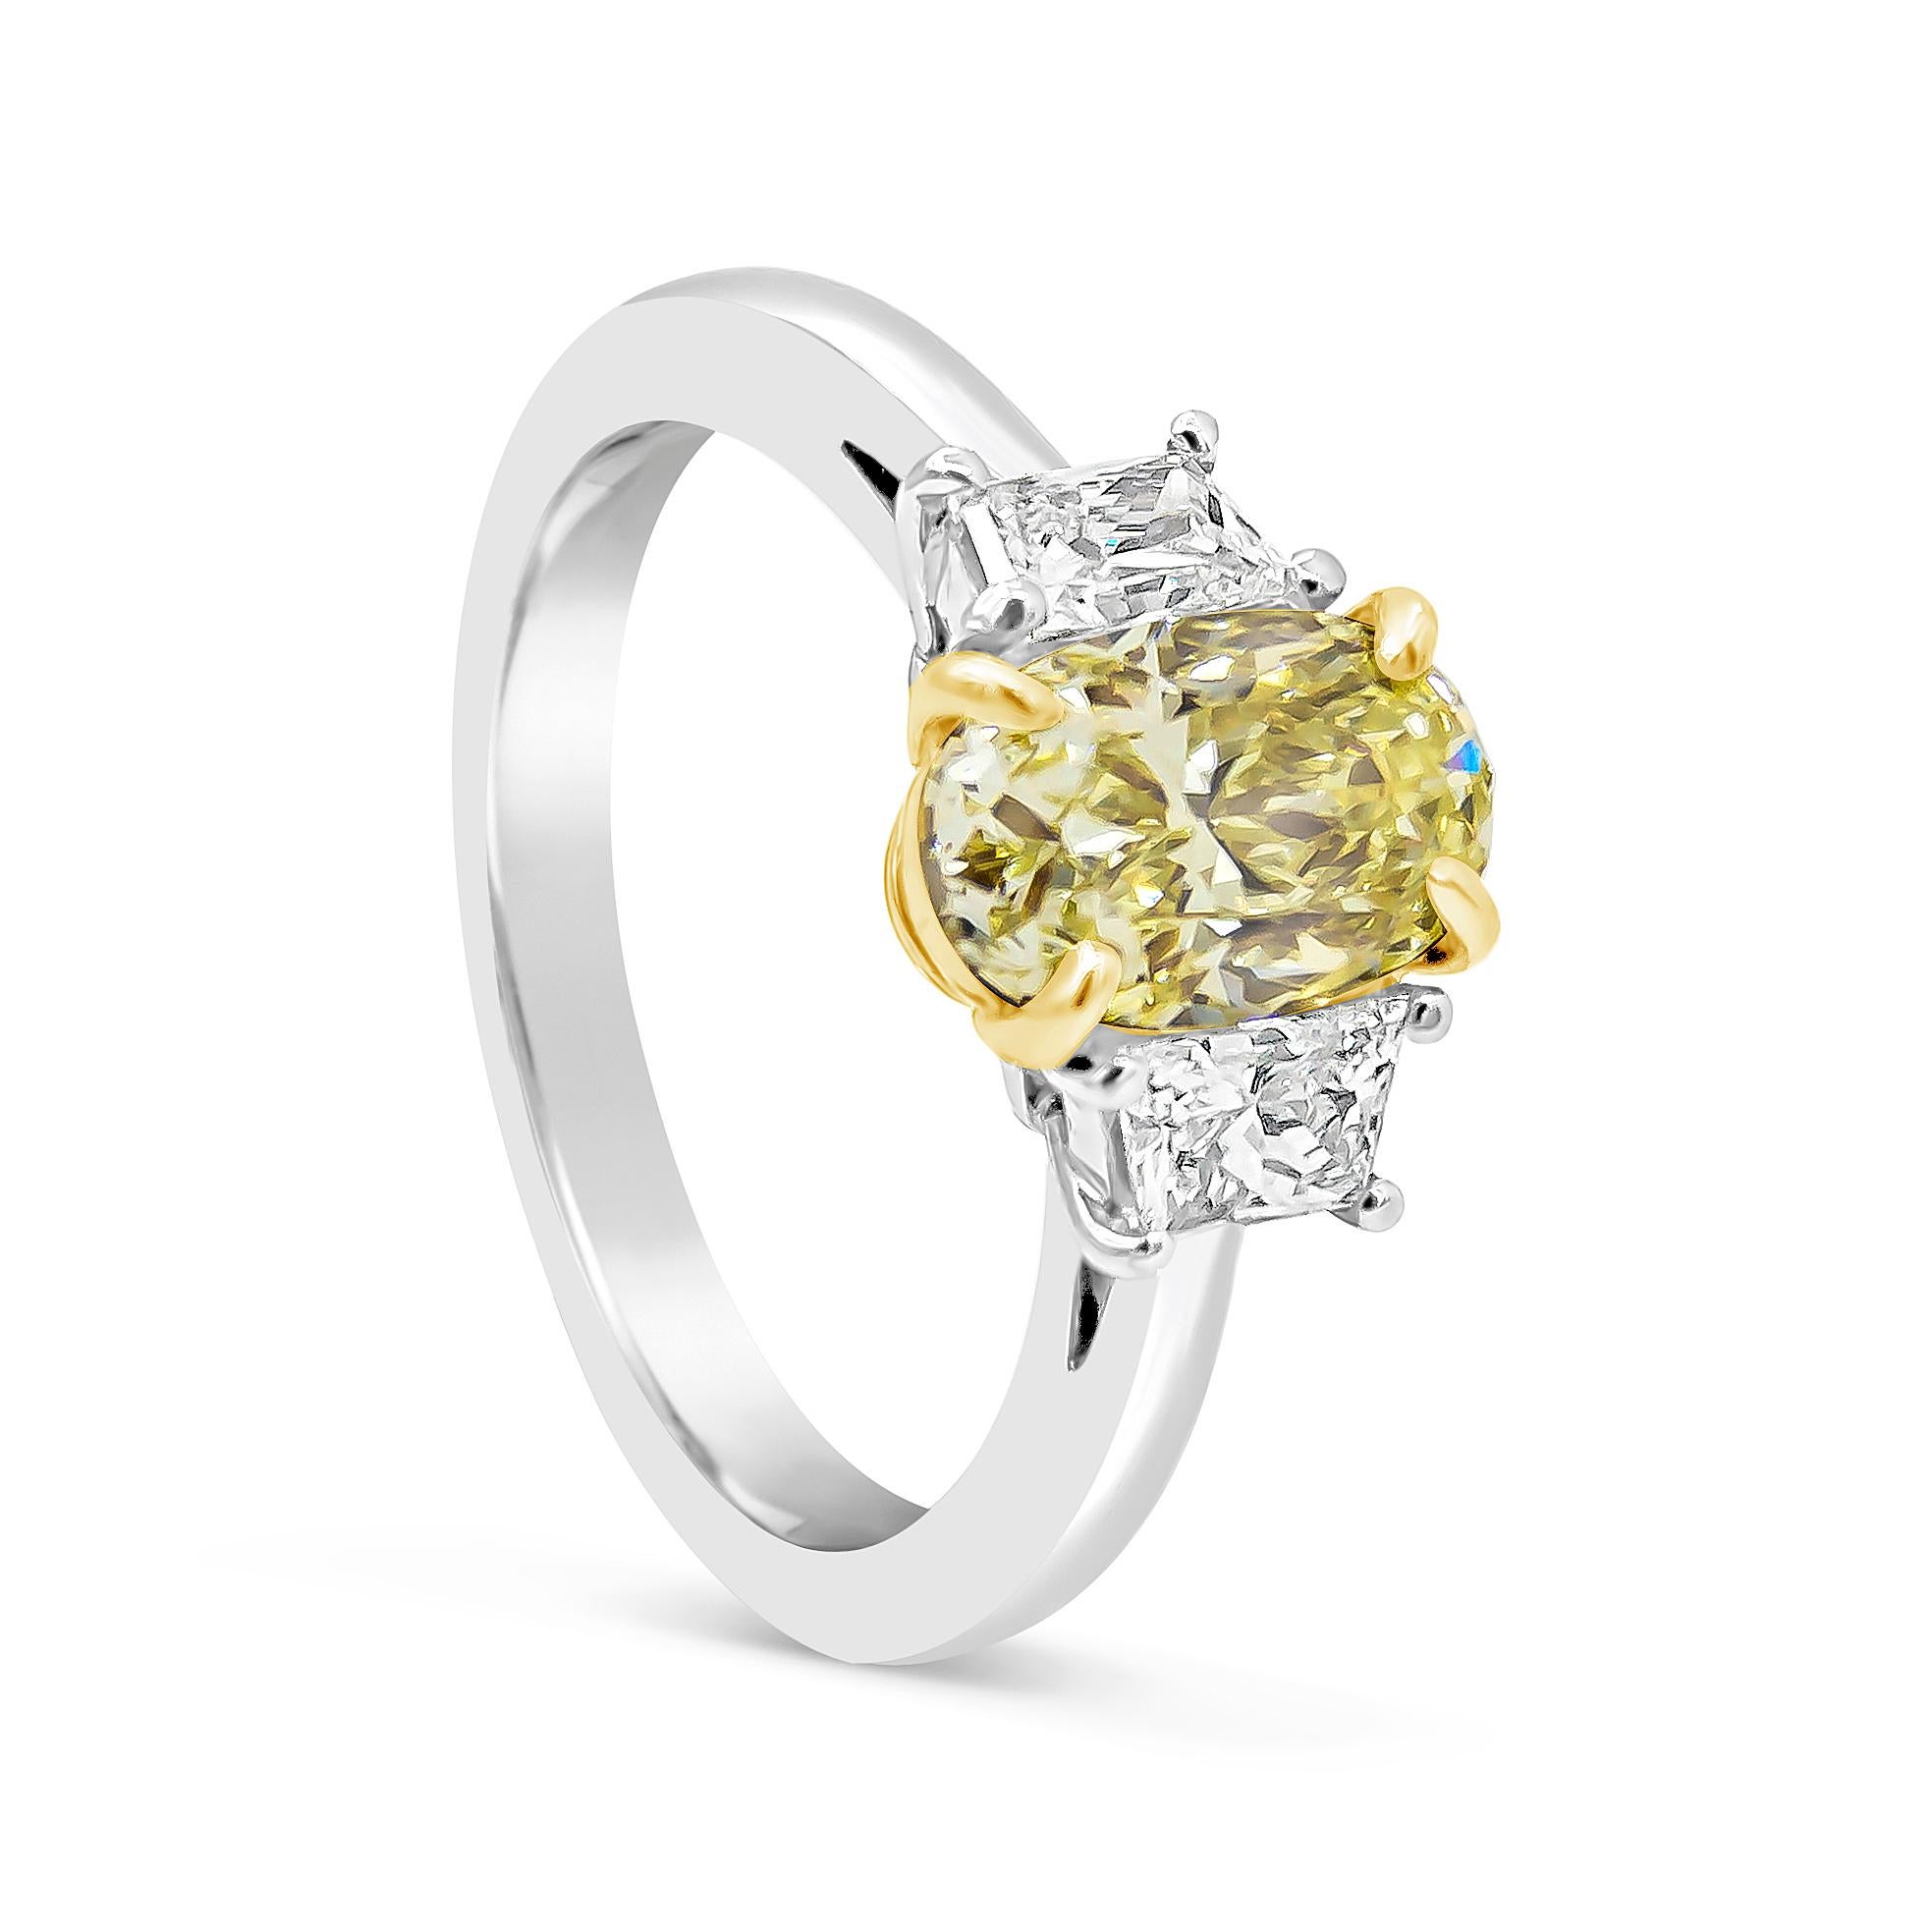 Showcasing a color-rich 1.57 carats oval cut yellow diamond certified by GIA as Fancy Yellow color and VS1 clarity, set in a four prong 18K yellow gold. Flanked by two trapezoid diamonds weighing 0.50 carats total, set in a polished platinum